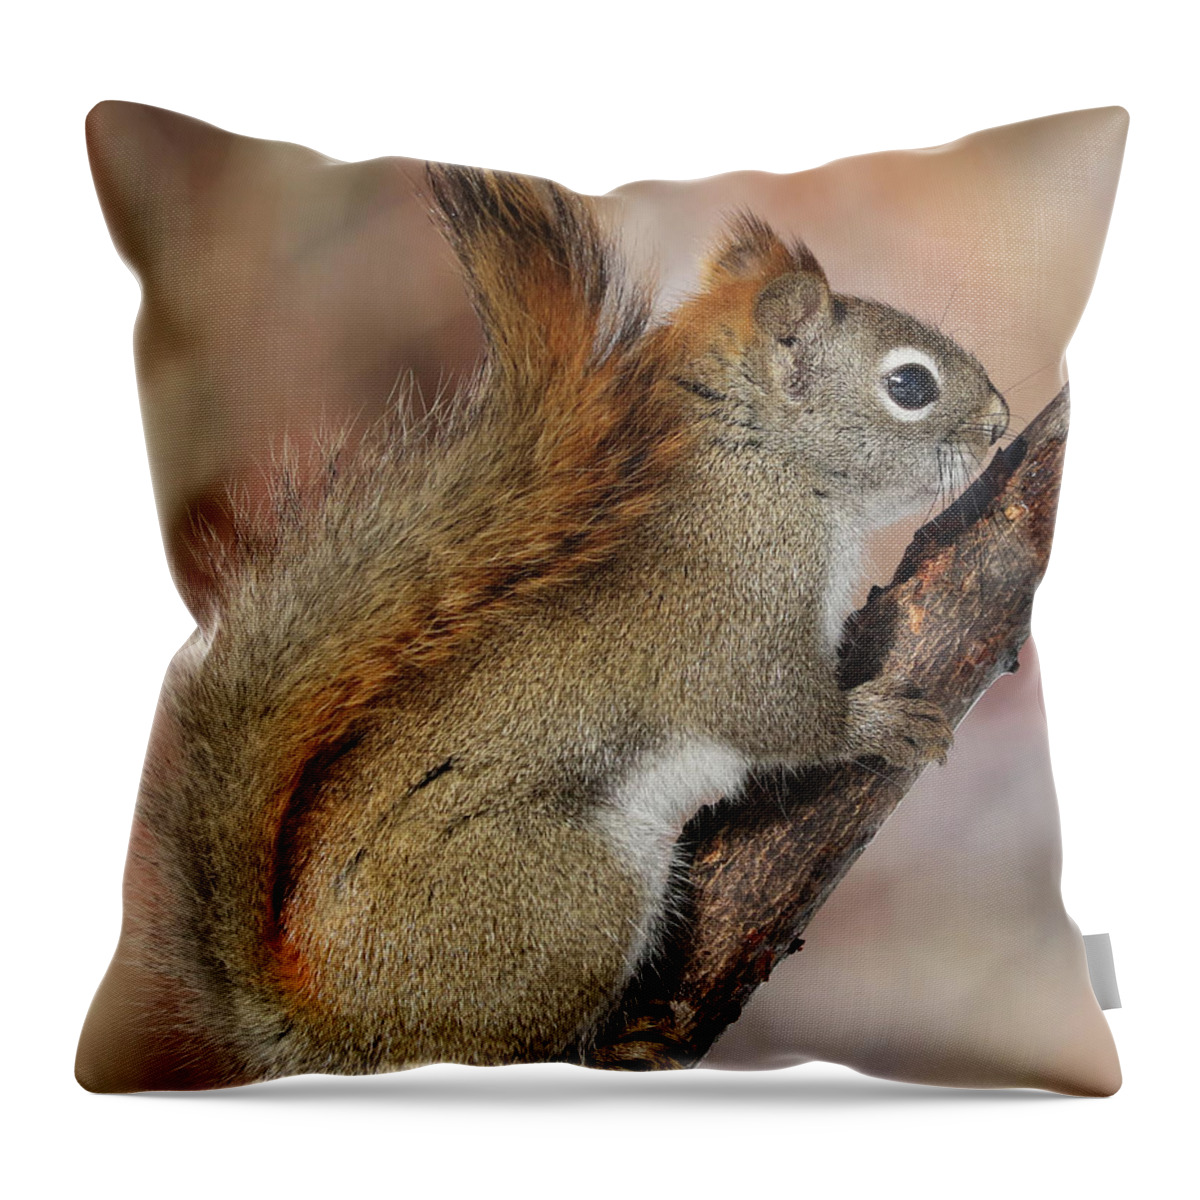 American Red Squirrel Throw Pillow featuring the photograph Red Squirrel #1 by Doris Potter